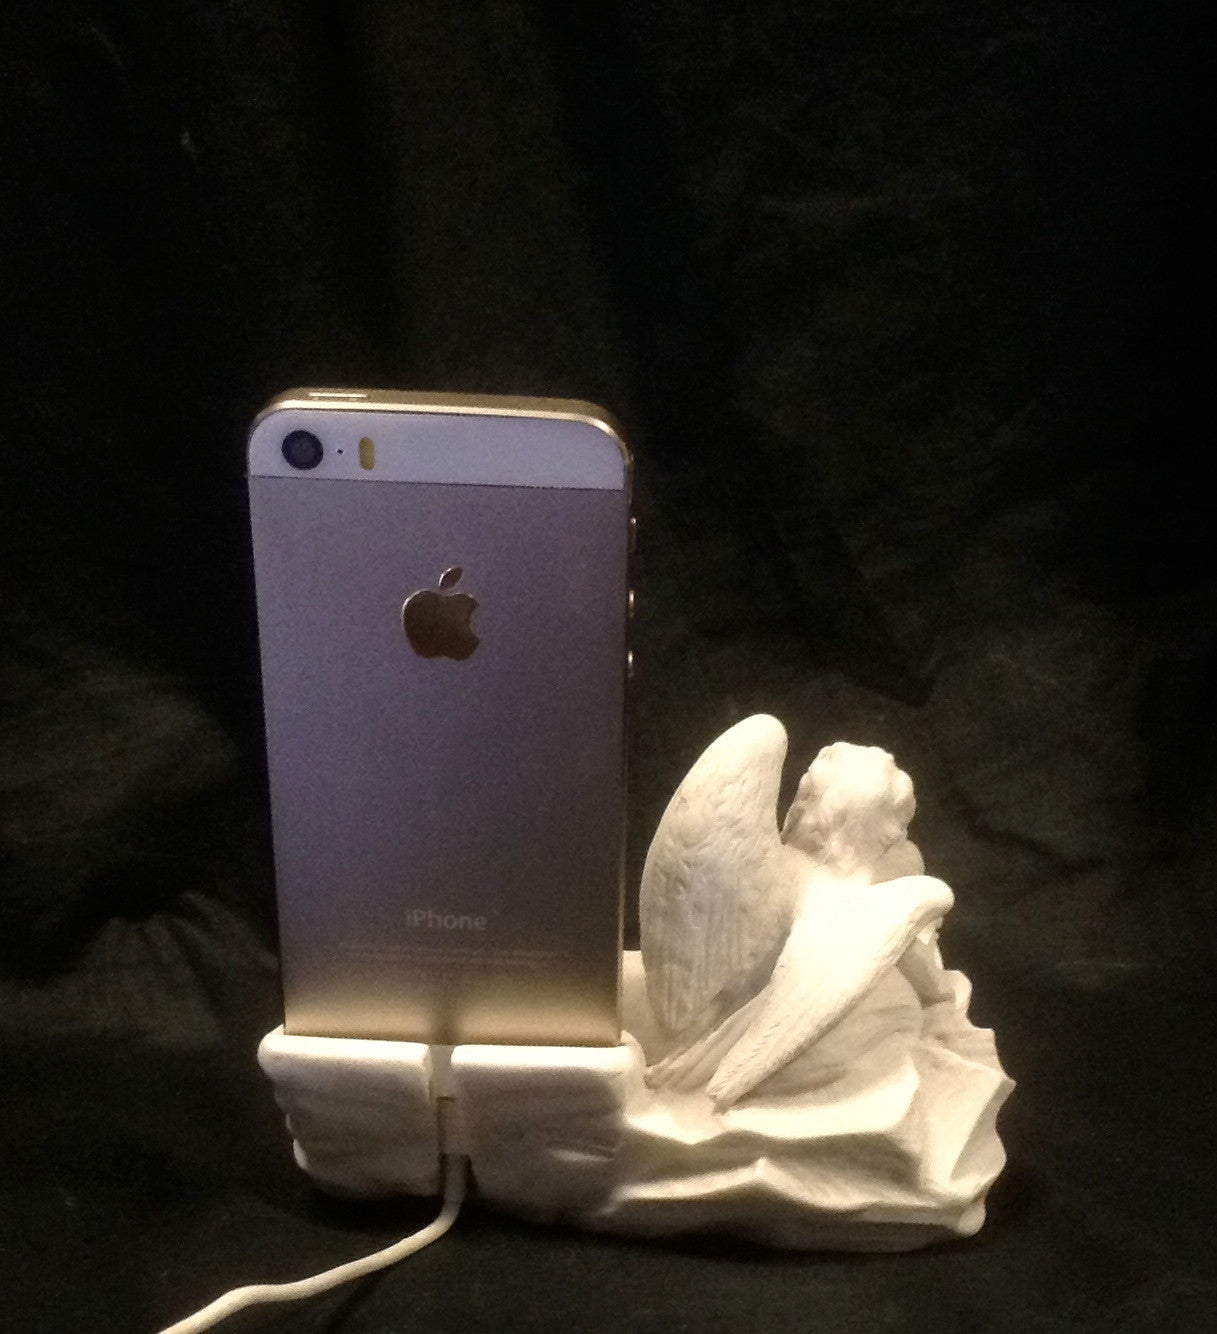 Resting Cupid iPhone 5s Dock Stand